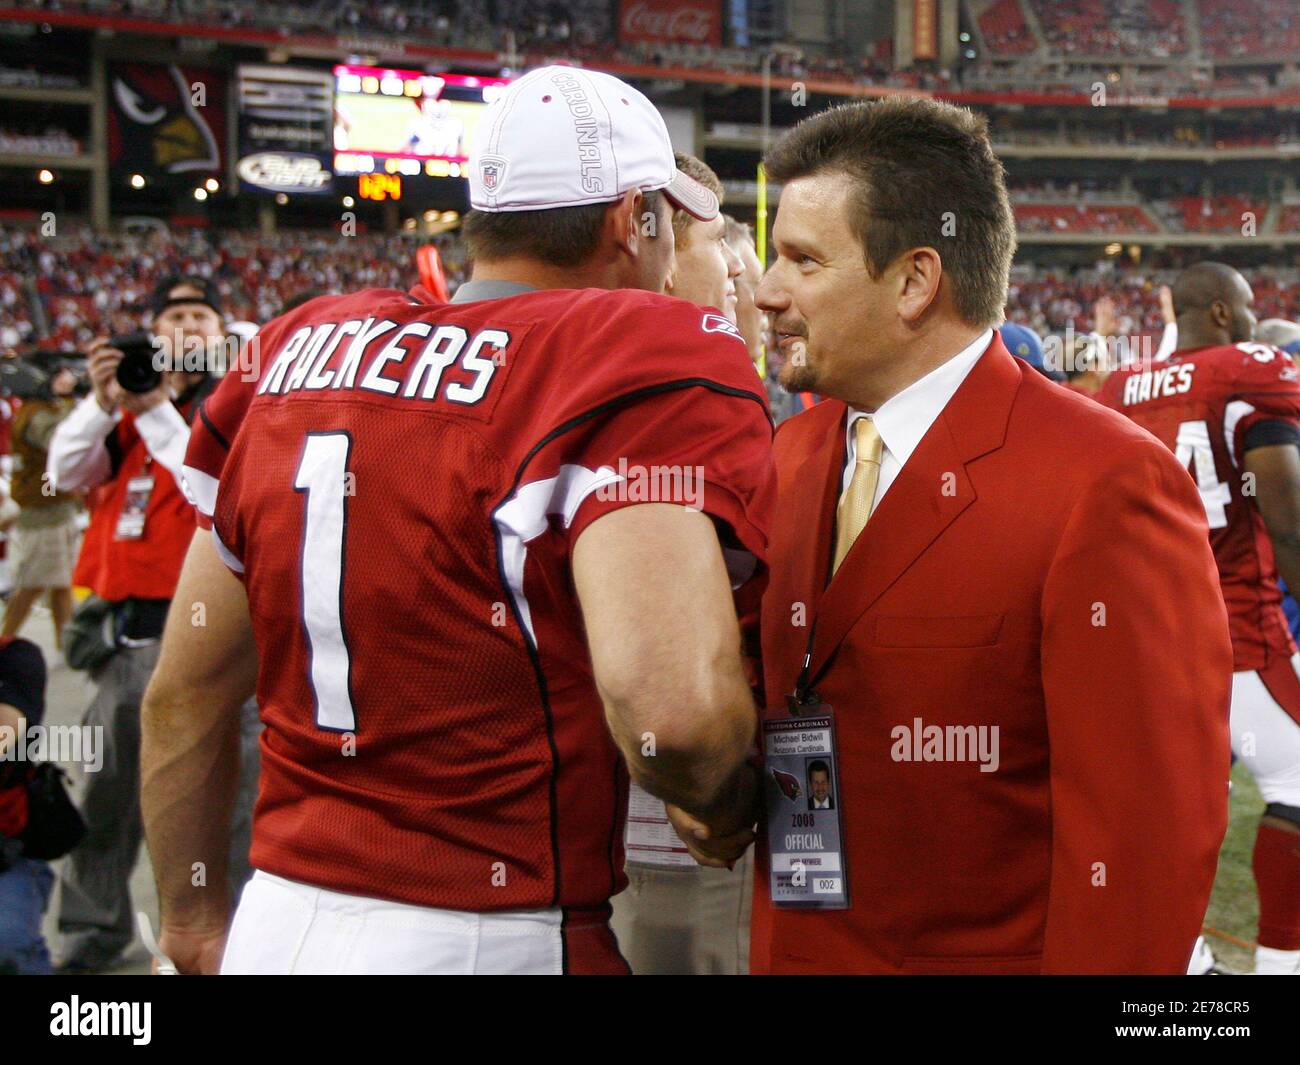 Arizona Cardinals kicker Neil Rackers (L) celebrates with president Michael Bidwill (R) after defeating the St Louis Rams and capturing the NFC West during an NFL game in Glendale, Arizona, December 7, 2008. REUTERS/Rick Scuteri (UNITED STATES) Stock Photo